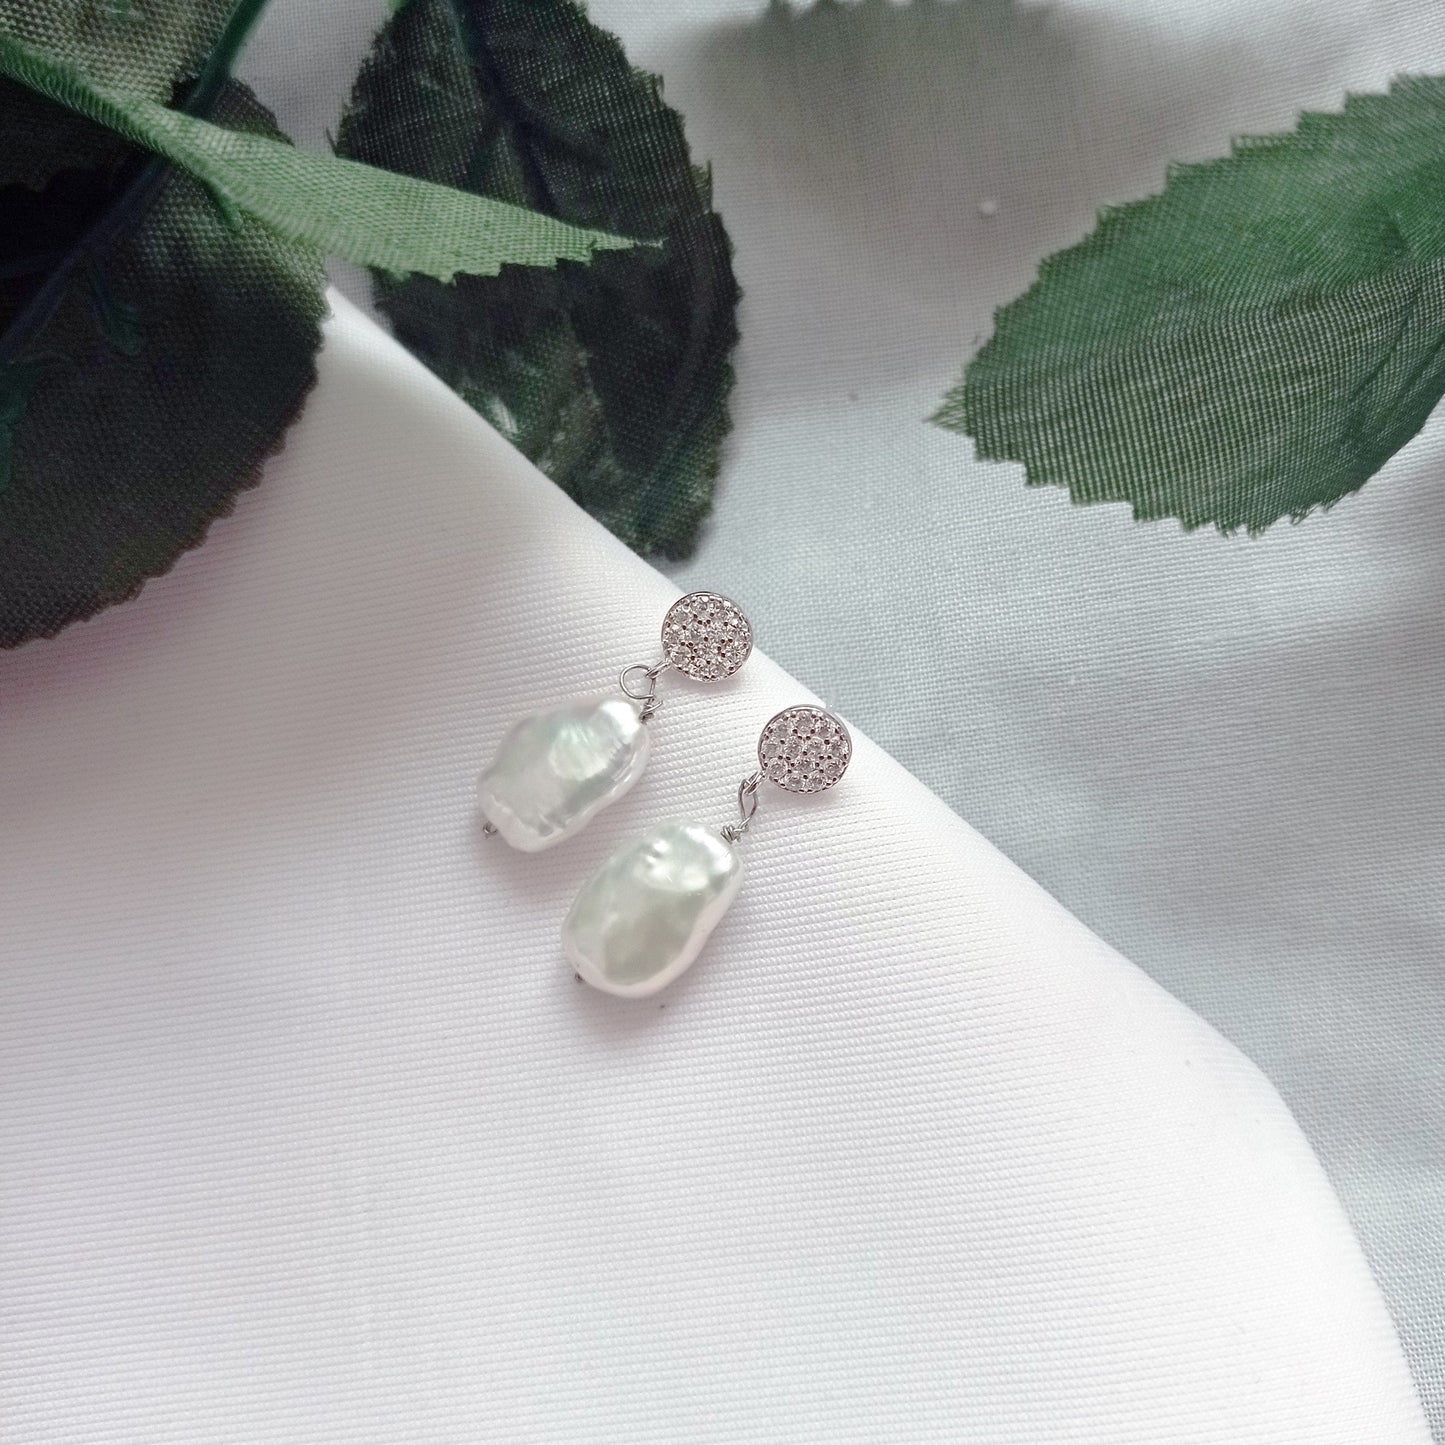 Sterling Silver Stud Earrings With Silver Freshwater Pearls | by nlanlaVictory-4